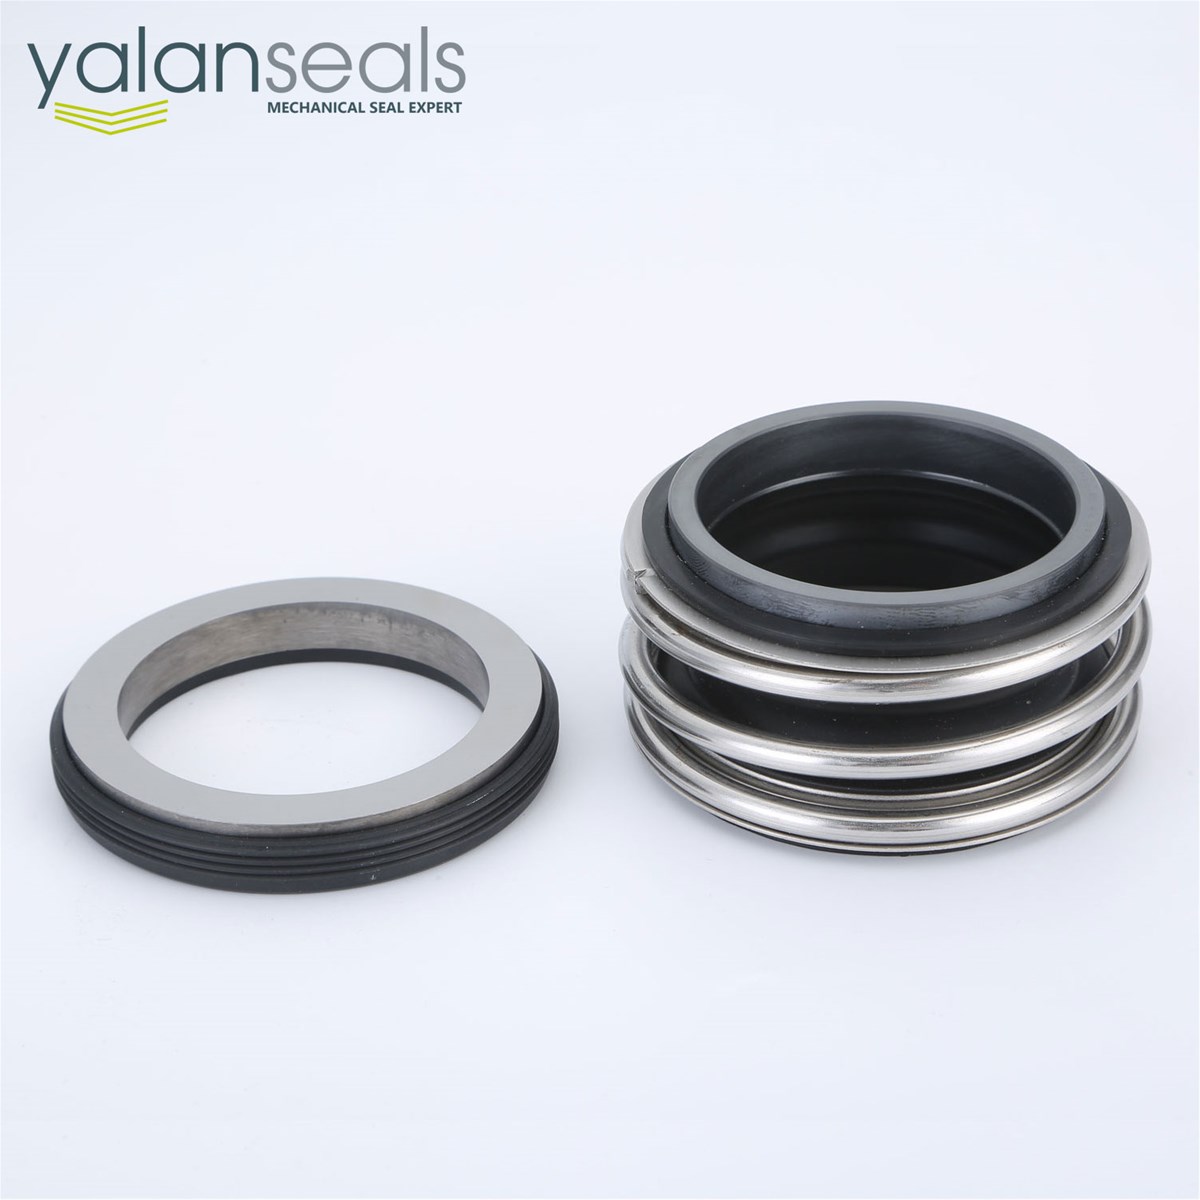 MG1 AKA 109 Mechanical Seal for Centrifugal Pumps Submerged Motors and Piping Pumps